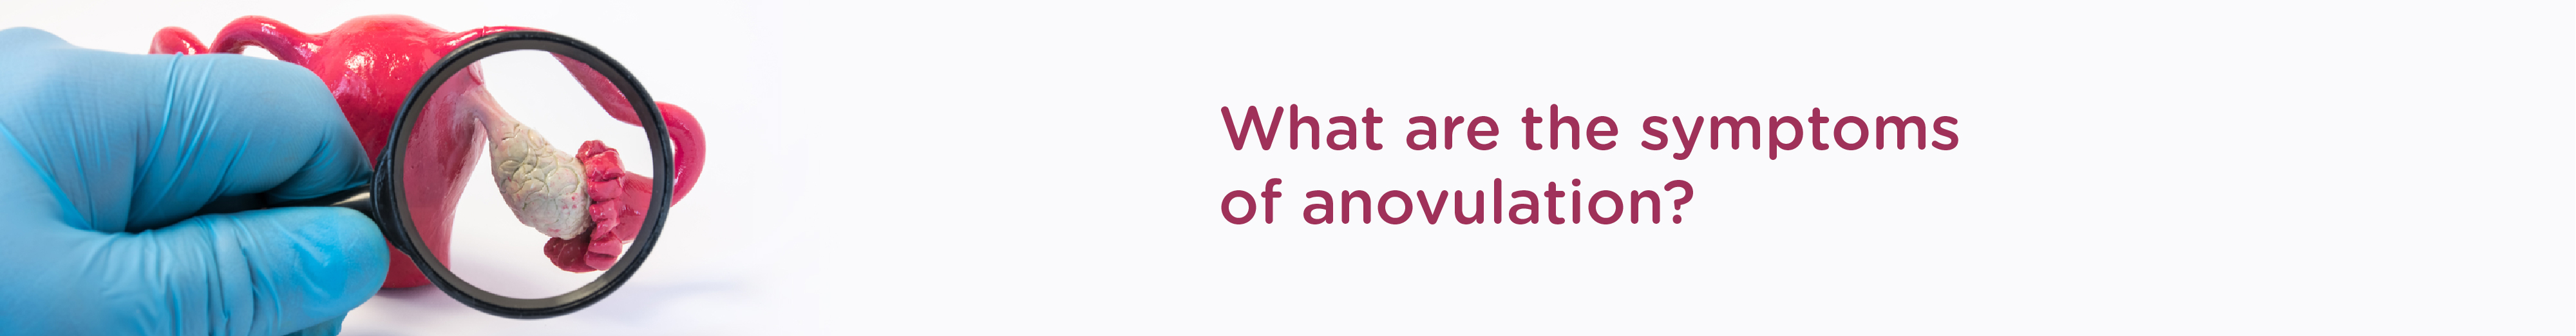 What are the Symptoms of Anovulation?